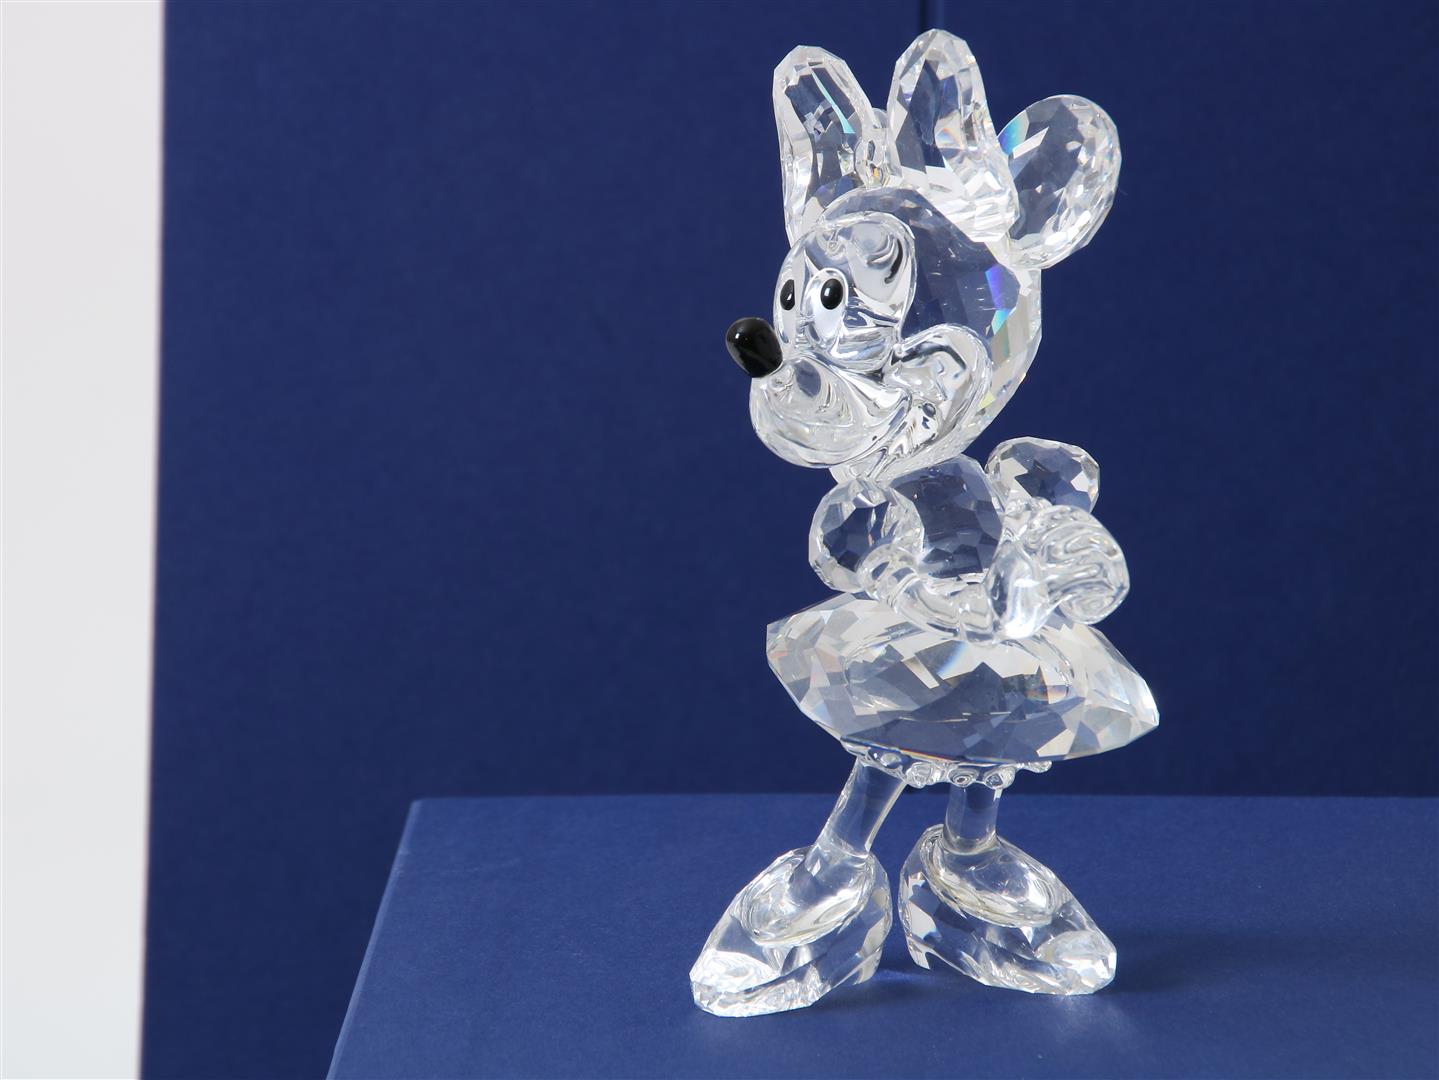 Series of 6 Swarovski crystal sculptures, Disney Showcase Collection, Donald Duck, Daisy Duck, - Image 8 of 11